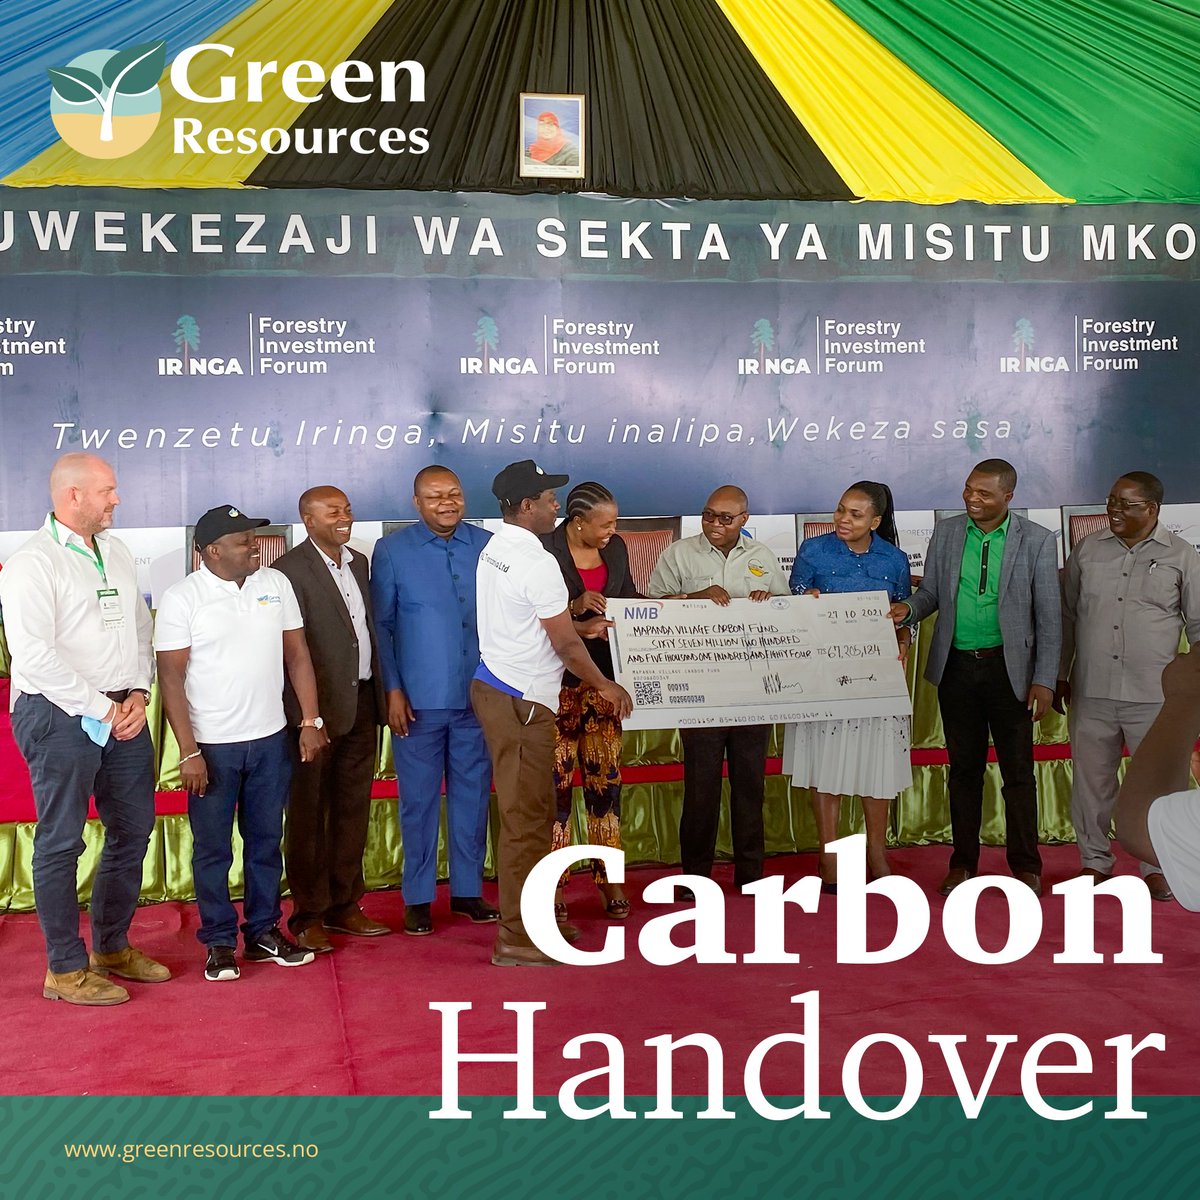 #SharedValue: 10% of our Carbon Revenues go to the communities surrounding our plantations

The Green Resources Carbon Fund was set up to support achieving sustainable development & create social infrastructure. We've contributed 67 Million to the Mapanda Village Carbon fund.